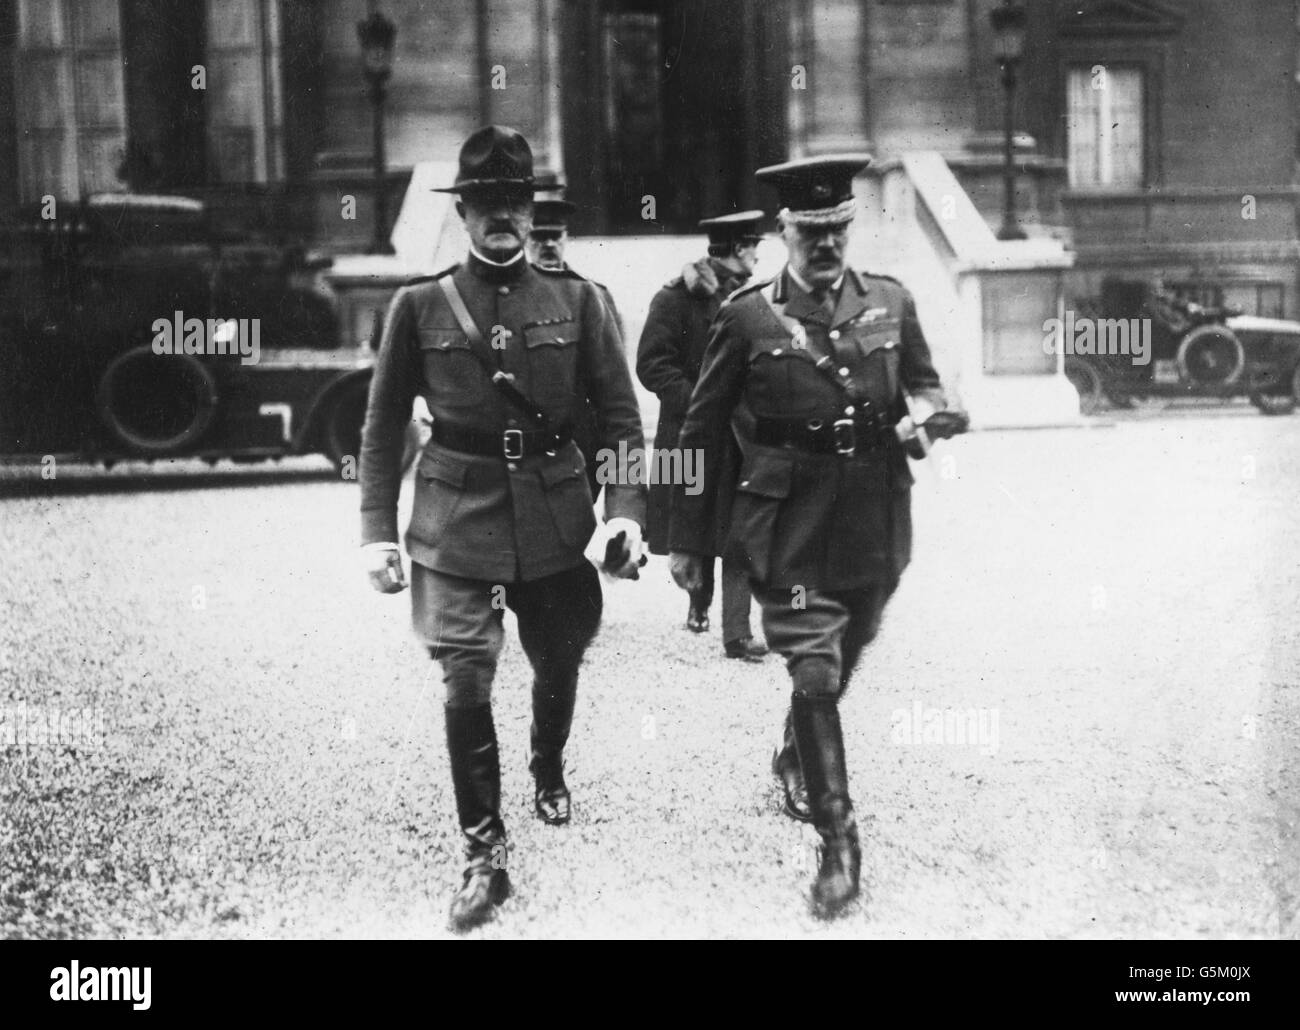 General Pershing, Commander in Chief of the American troops in France, and Sir William Robertson, Chief of the British General Staff at the Foreign Ministry in Paris. *Low res scan - hi res version available on request* Stock Photo